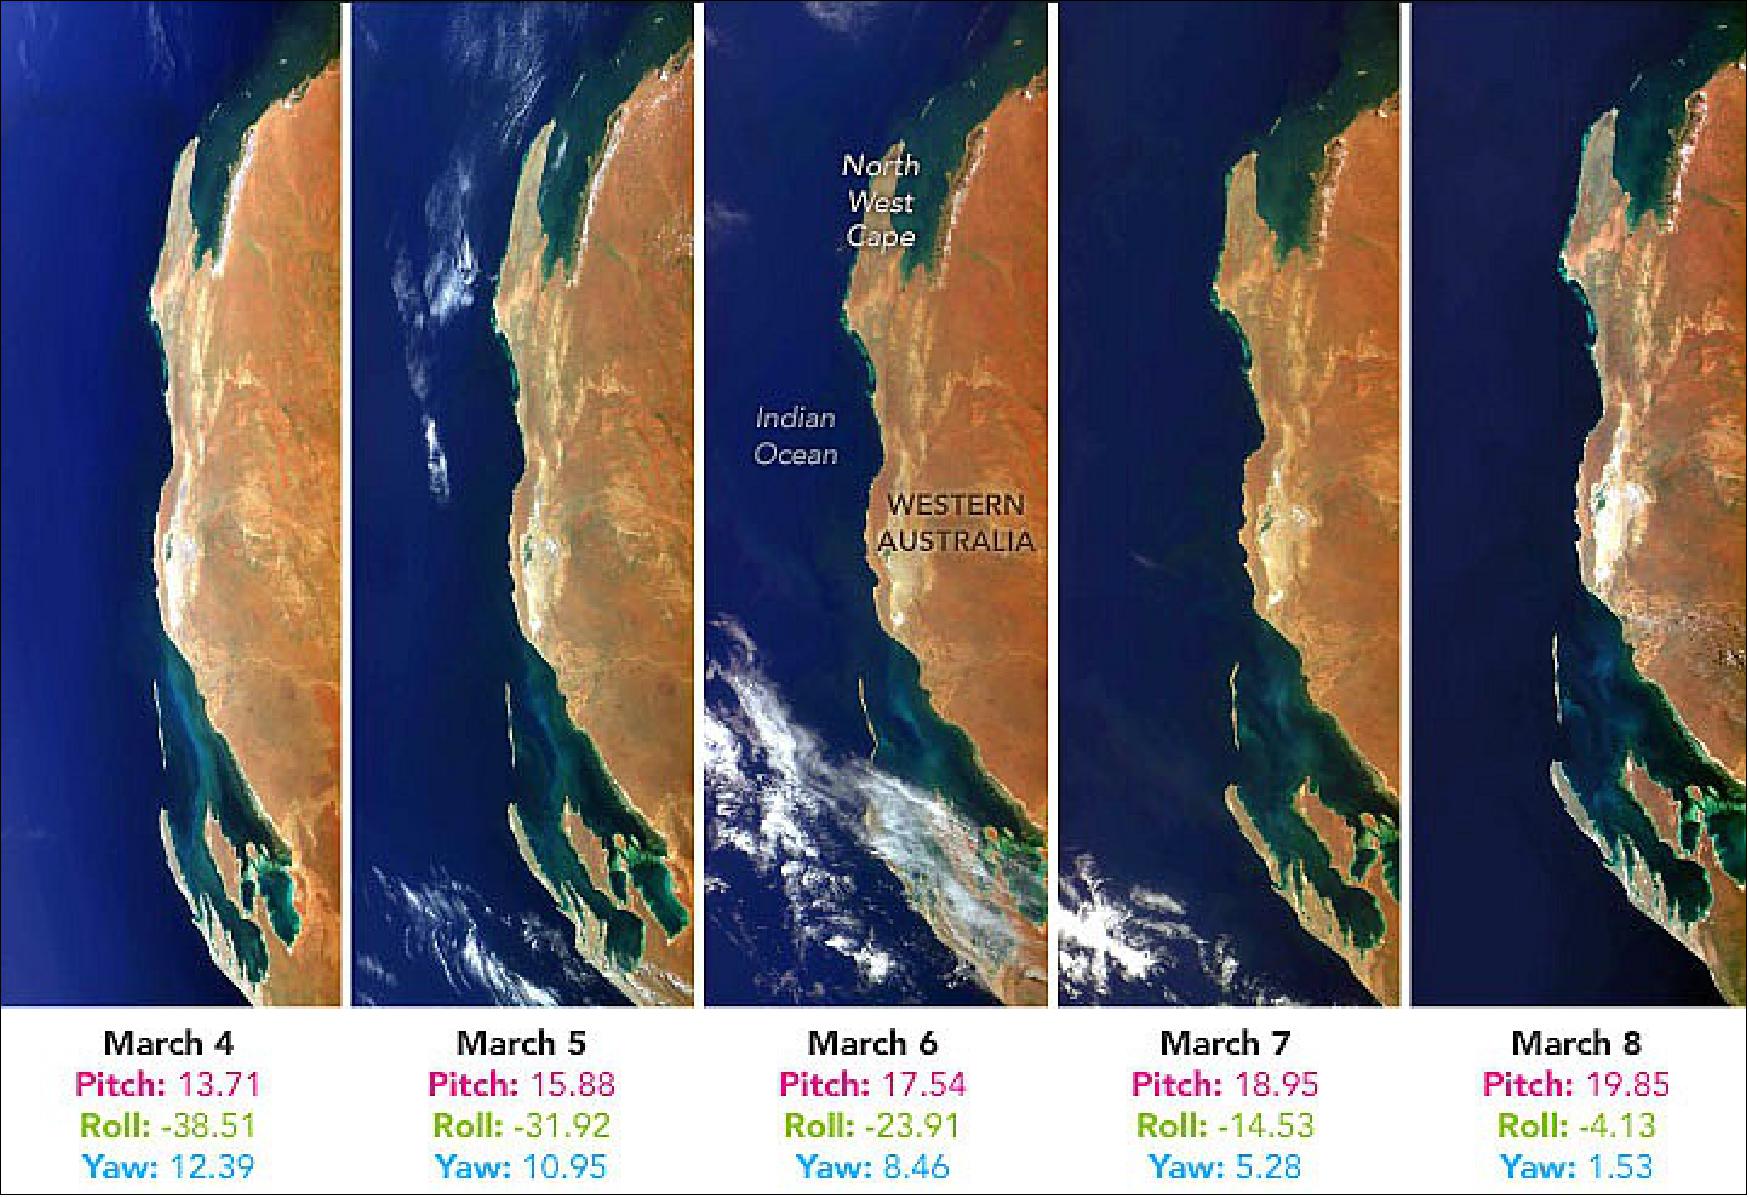 Figure 5: The natural-color images above were acquired on March 3-8, 2022, by the HawkEye sensor aboard the SeaHawk CubeSat. Though SeaHawk’s orbit around the Earth changes each day by a few degrees of longitude, mission operators were able to observe the same patch of the Australian coastline for six consecutive days by slightly tilting the satellite on each new overpass (image credit: NASA Earth Observatory images by Joshua Stevens, using SeaHawk/HawkEye imagery courtesy of Alan Holmes and Gene Feldman, NASA's Ocean Color Web. Story by Michael Carlowicz, with reporting from Joseph M. Smith, NASA EOSDIS Science Writer)